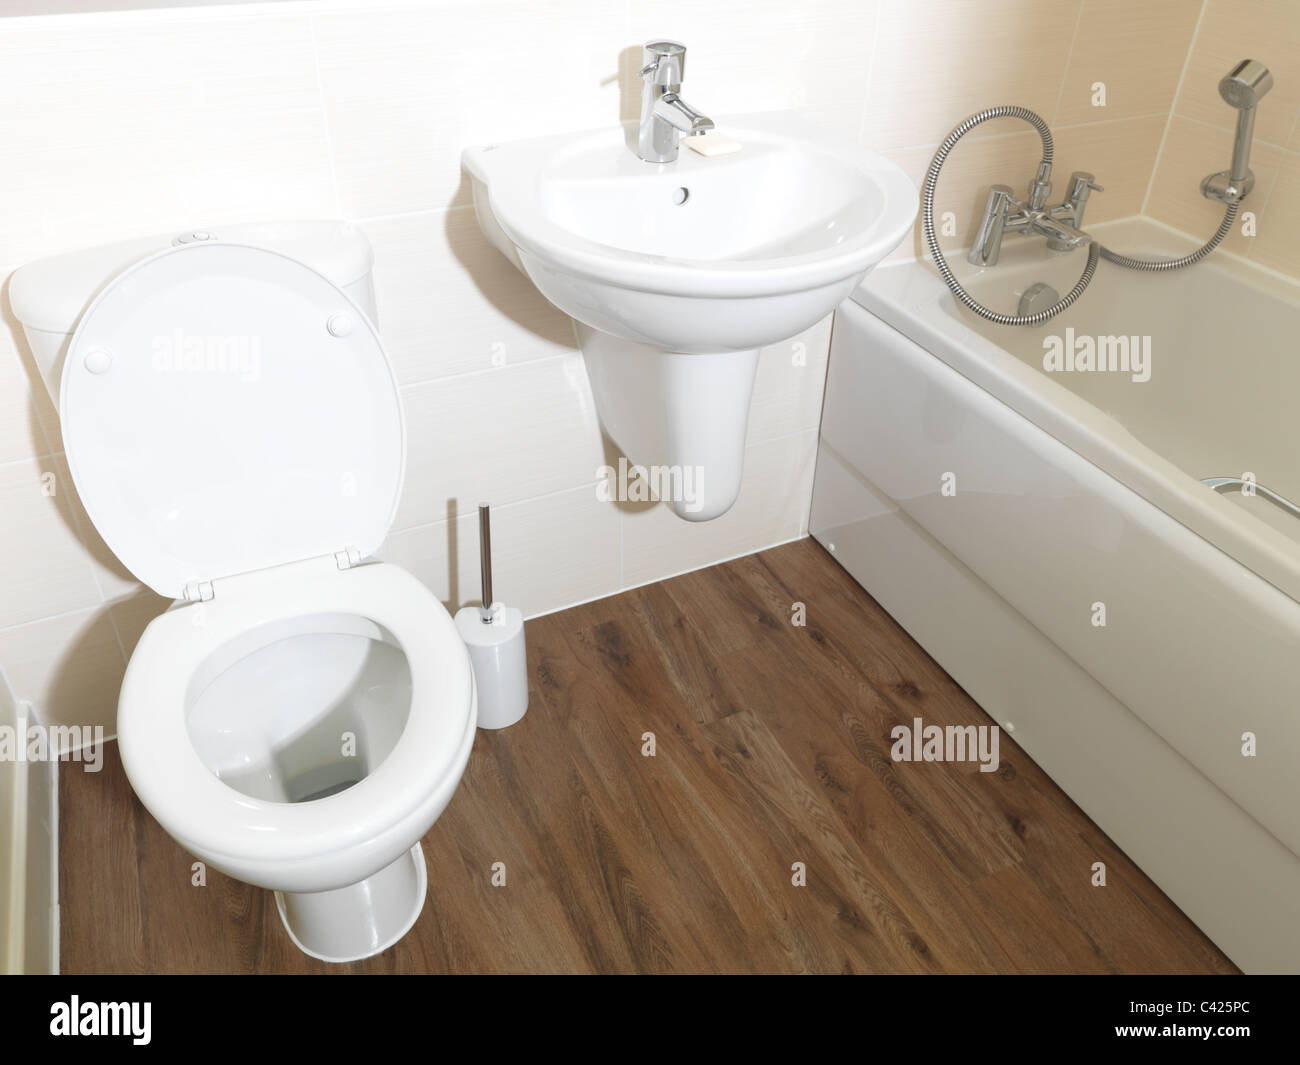 New Apartment Bathroom Toilet, Basin And Bath With Shower Attached Stock Photo